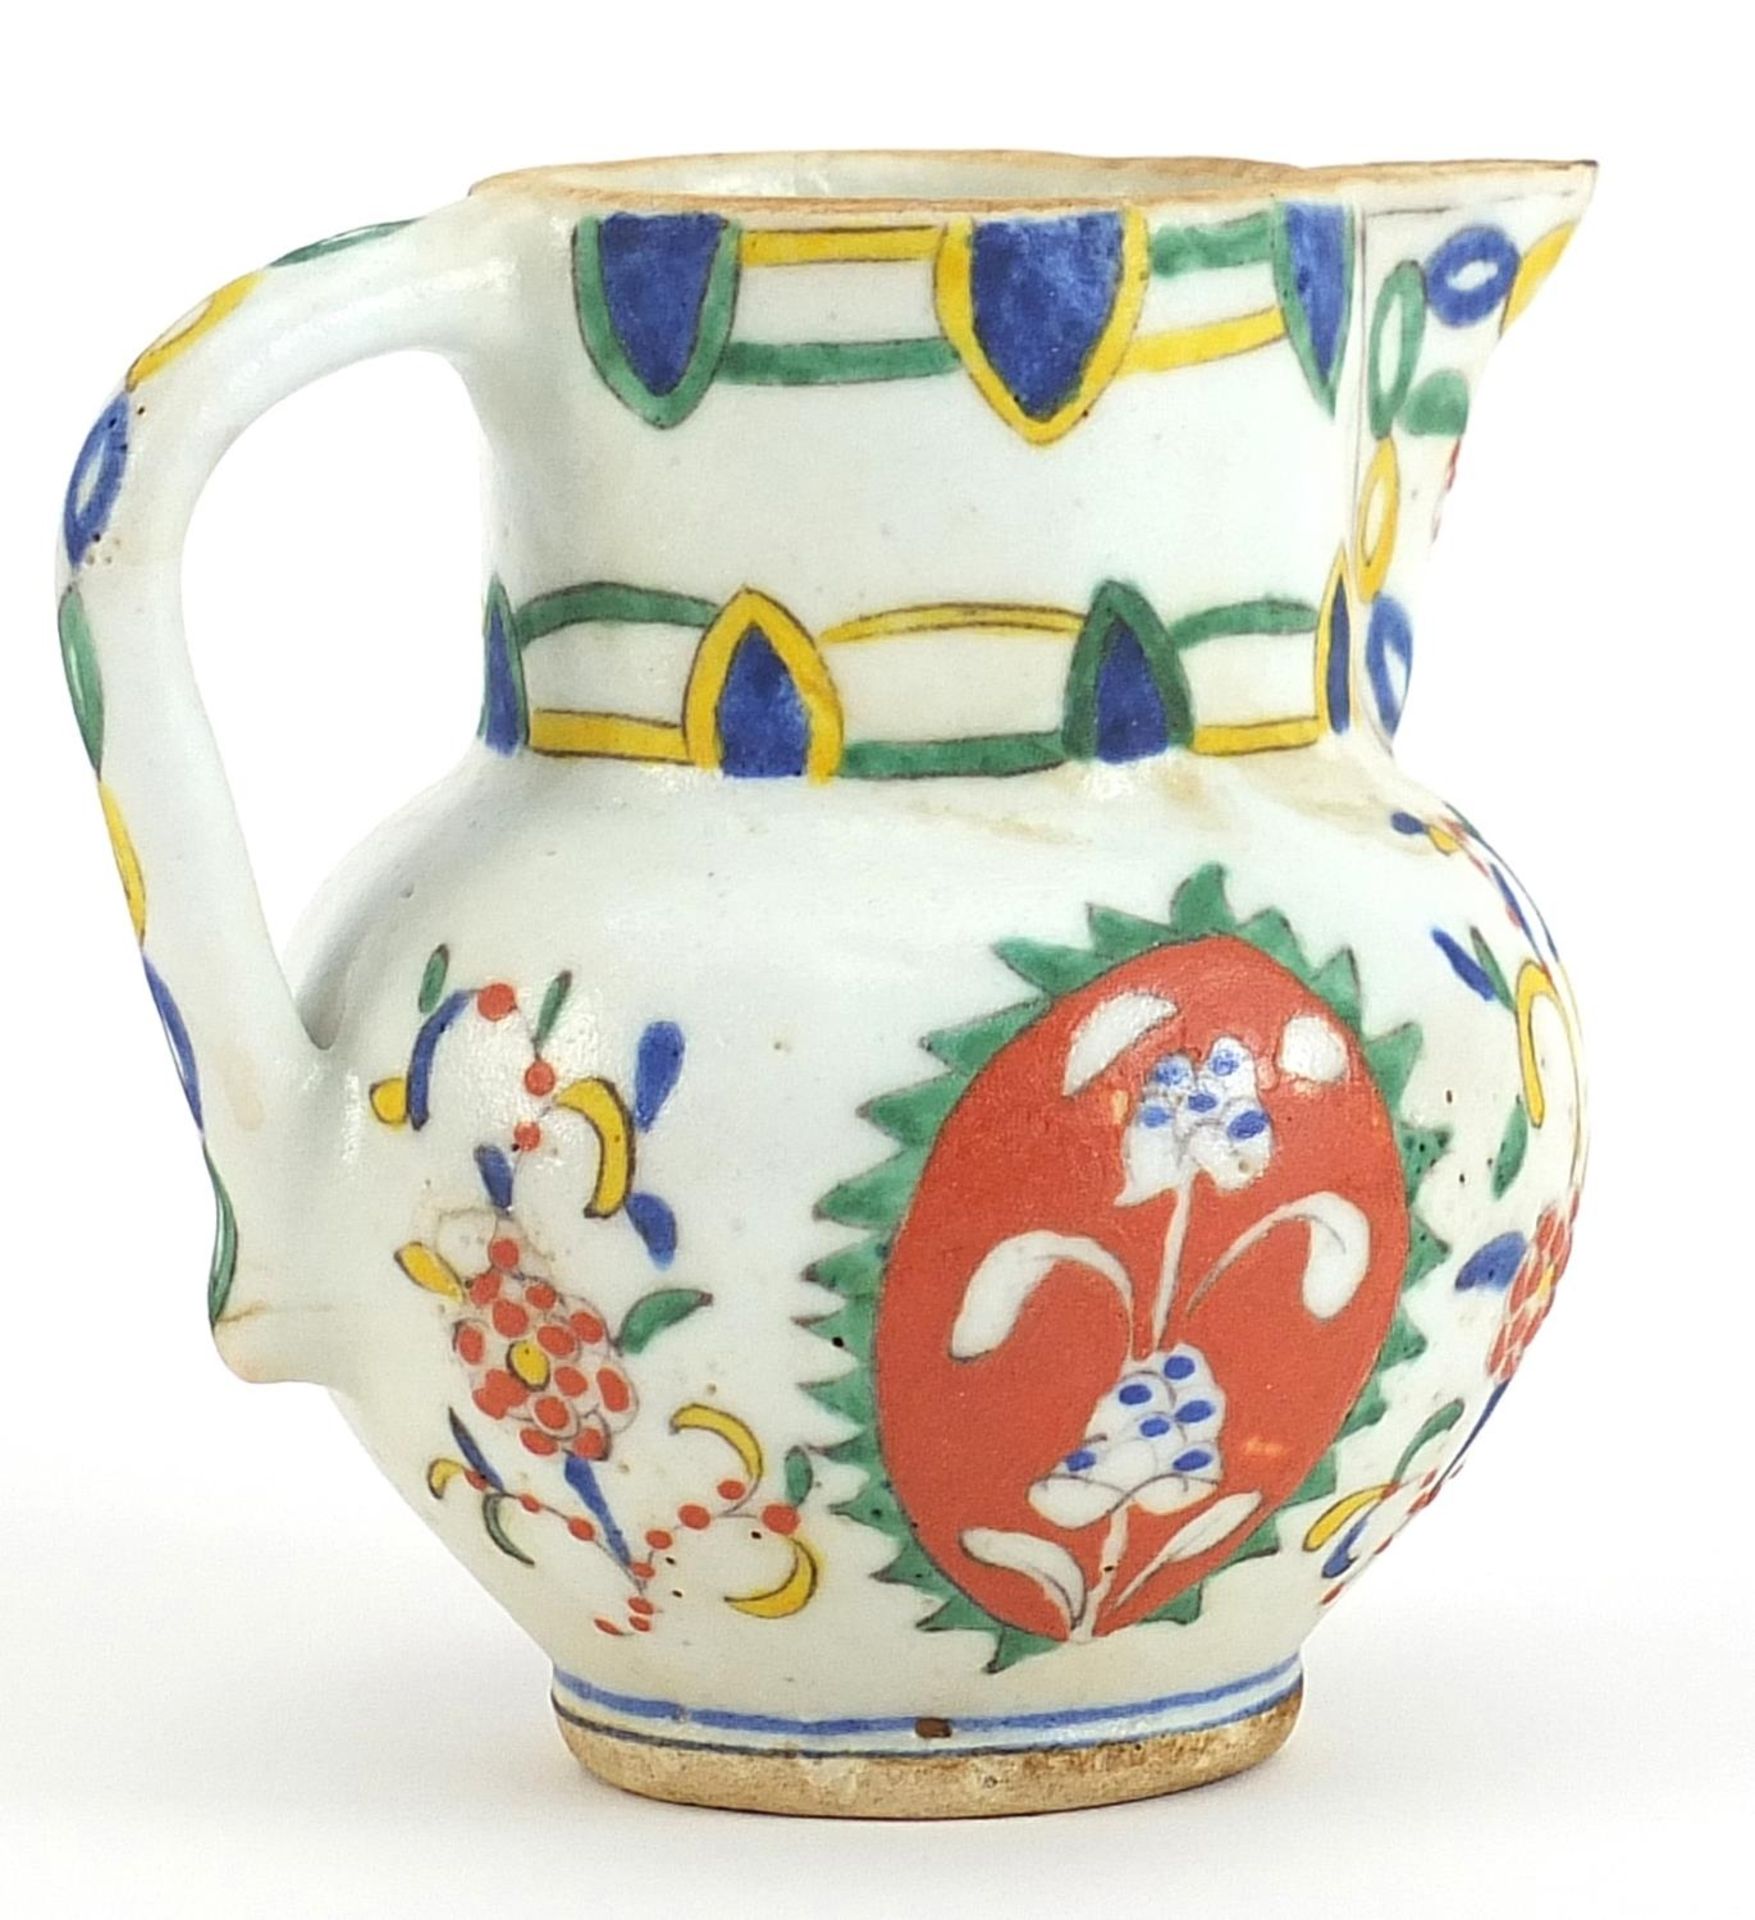 Turkish Kutahya pottery jug hand painted with flowers, 11.5cm high - Image 2 of 3